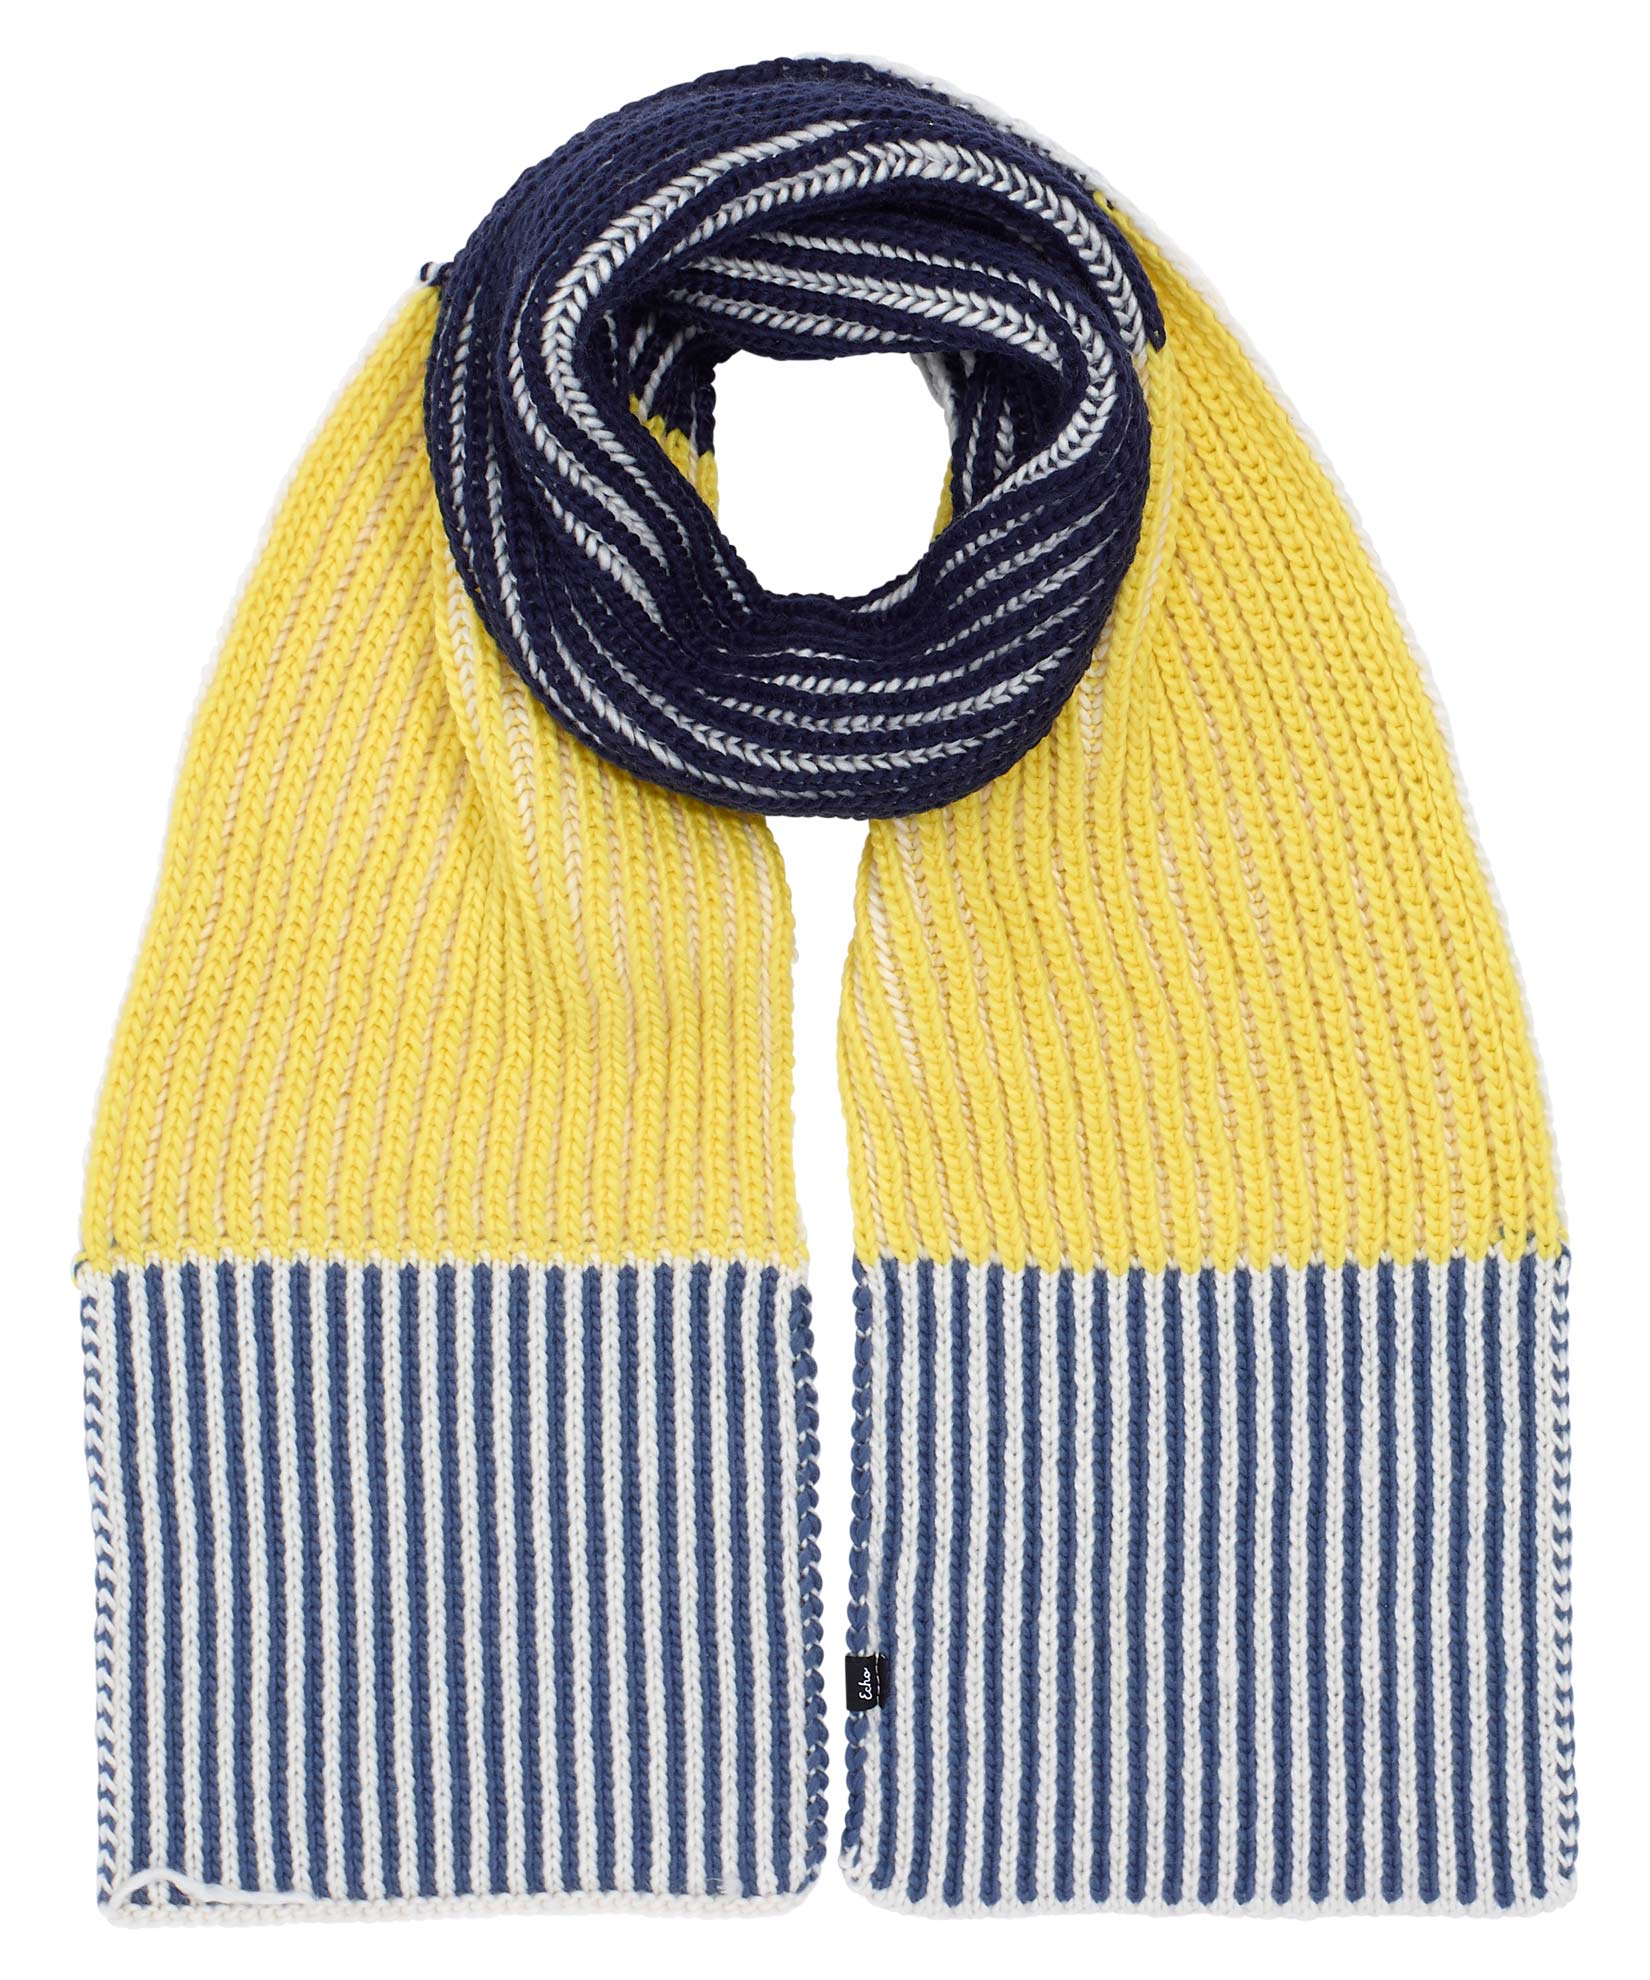 Highlighter Scarf in color Amparo Blue